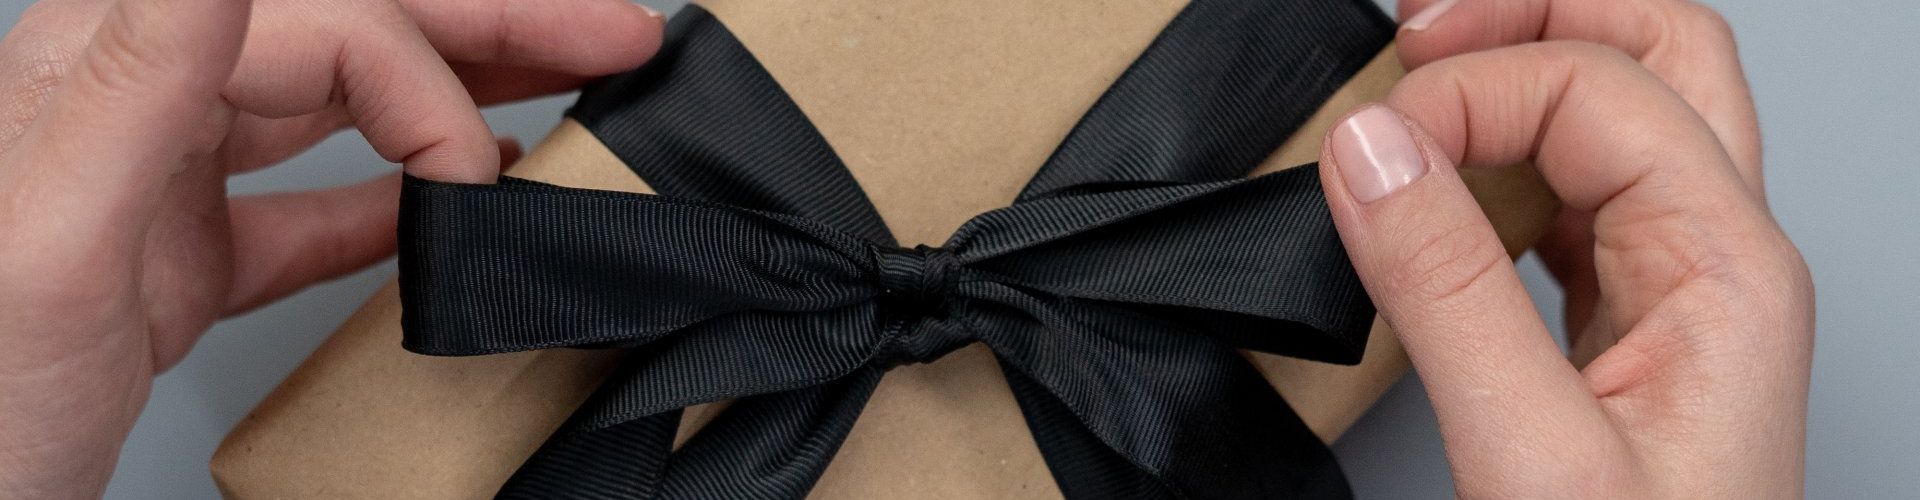 a person is holding a gift wrapped in brown paper with a black bow